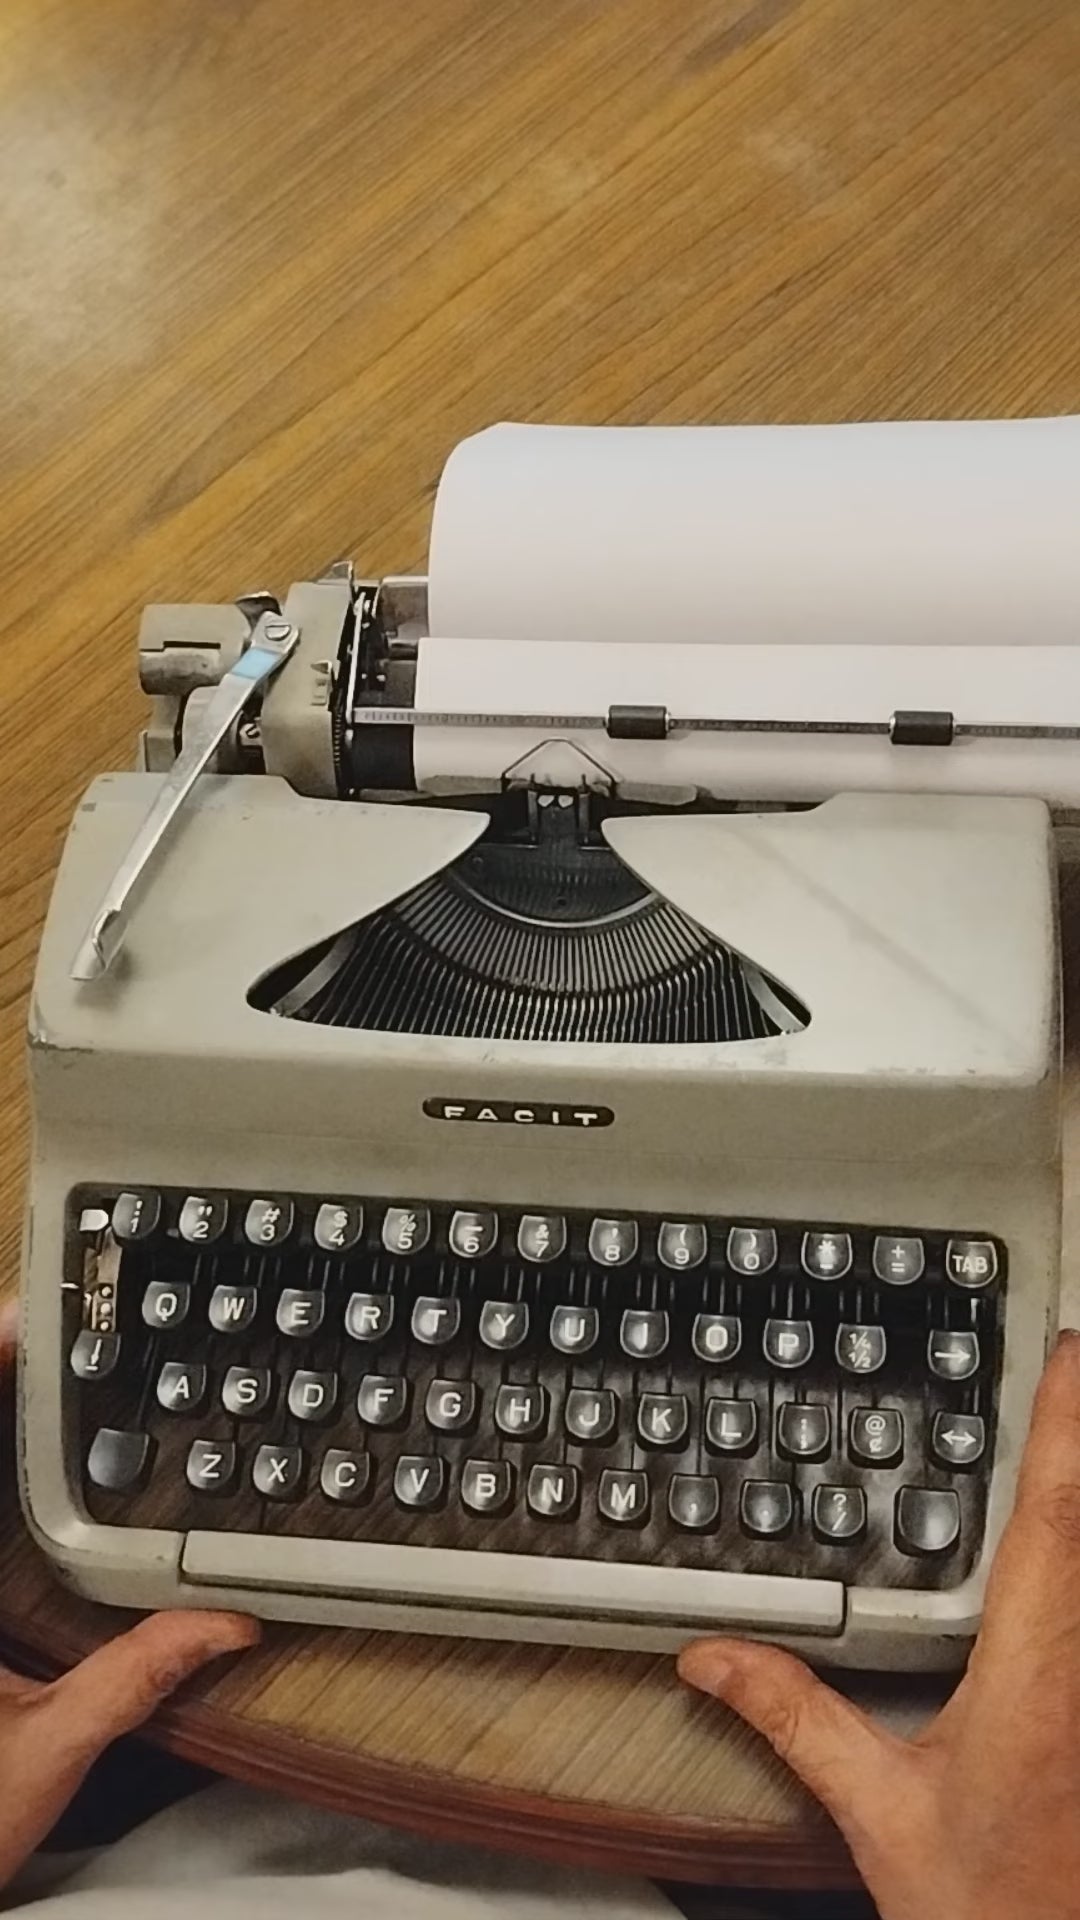 Typing Video of Facit Typewriter. Available from universaltypewritercompany.in